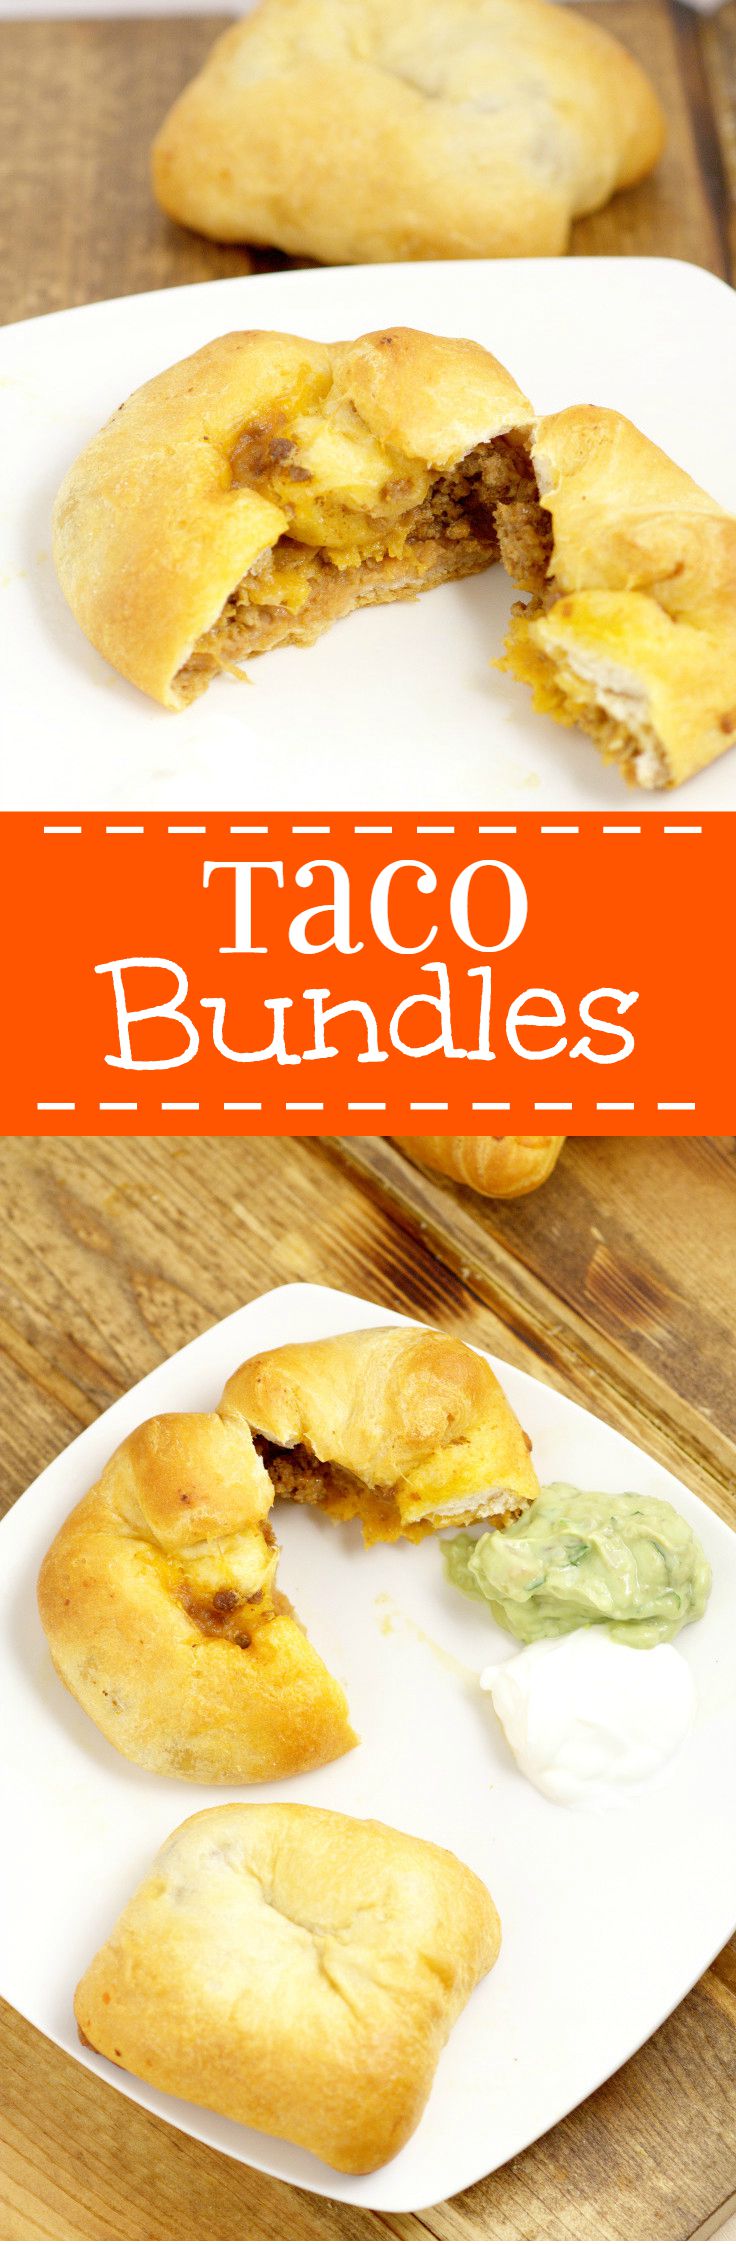 Taco Bundles Recipe - a delicious quick and easy family dinner recipe, using ground beef.  You can even use leftover taco meat.  Tacos on the go!  These are so easy and perfect for busy nights!